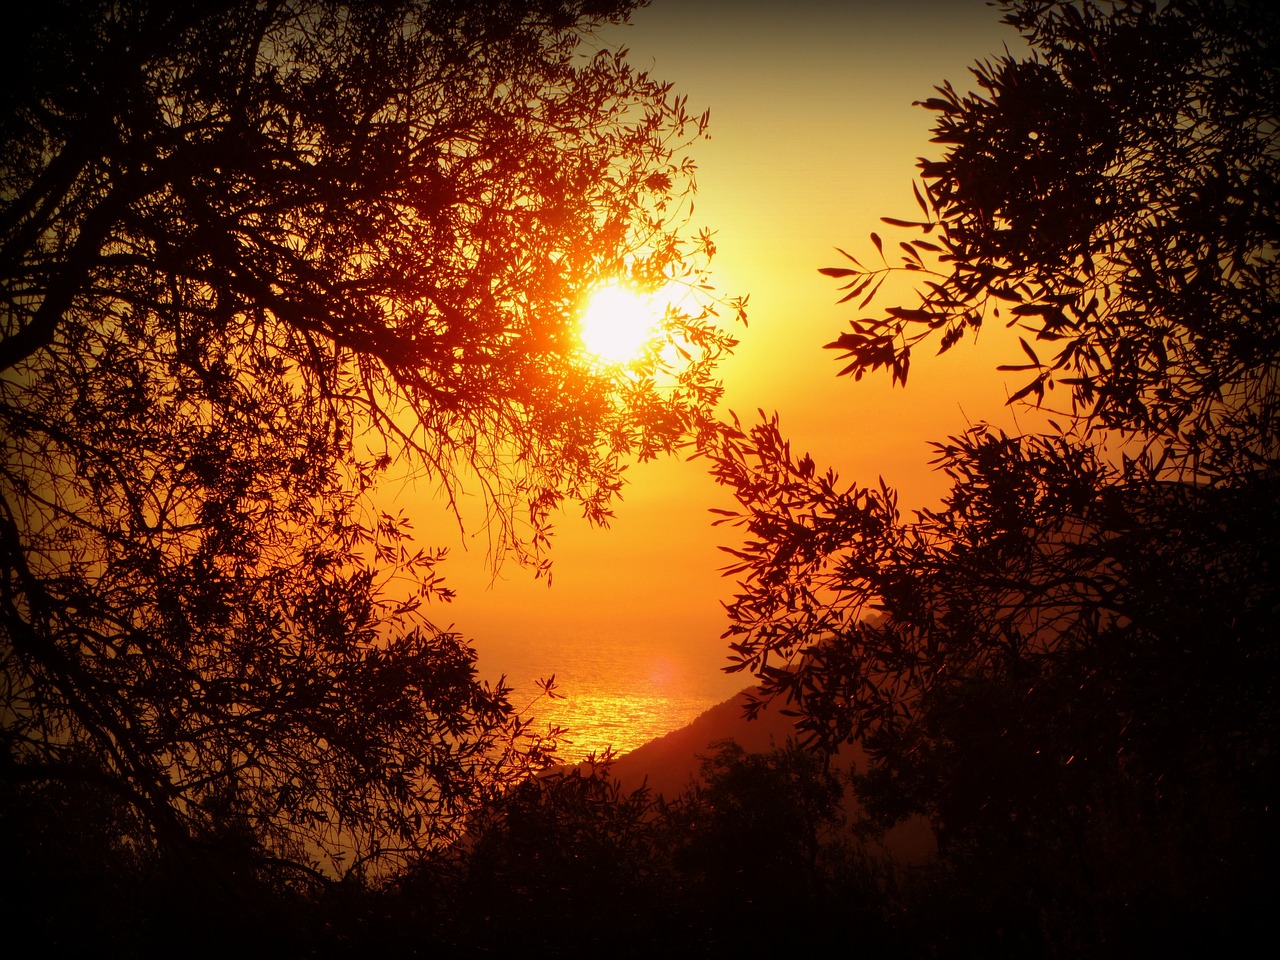 the sun is setting over a body of water, a picture, romanticism, malibu canyon, sun through the trees, mediterranean vista, shades of gold display naturally